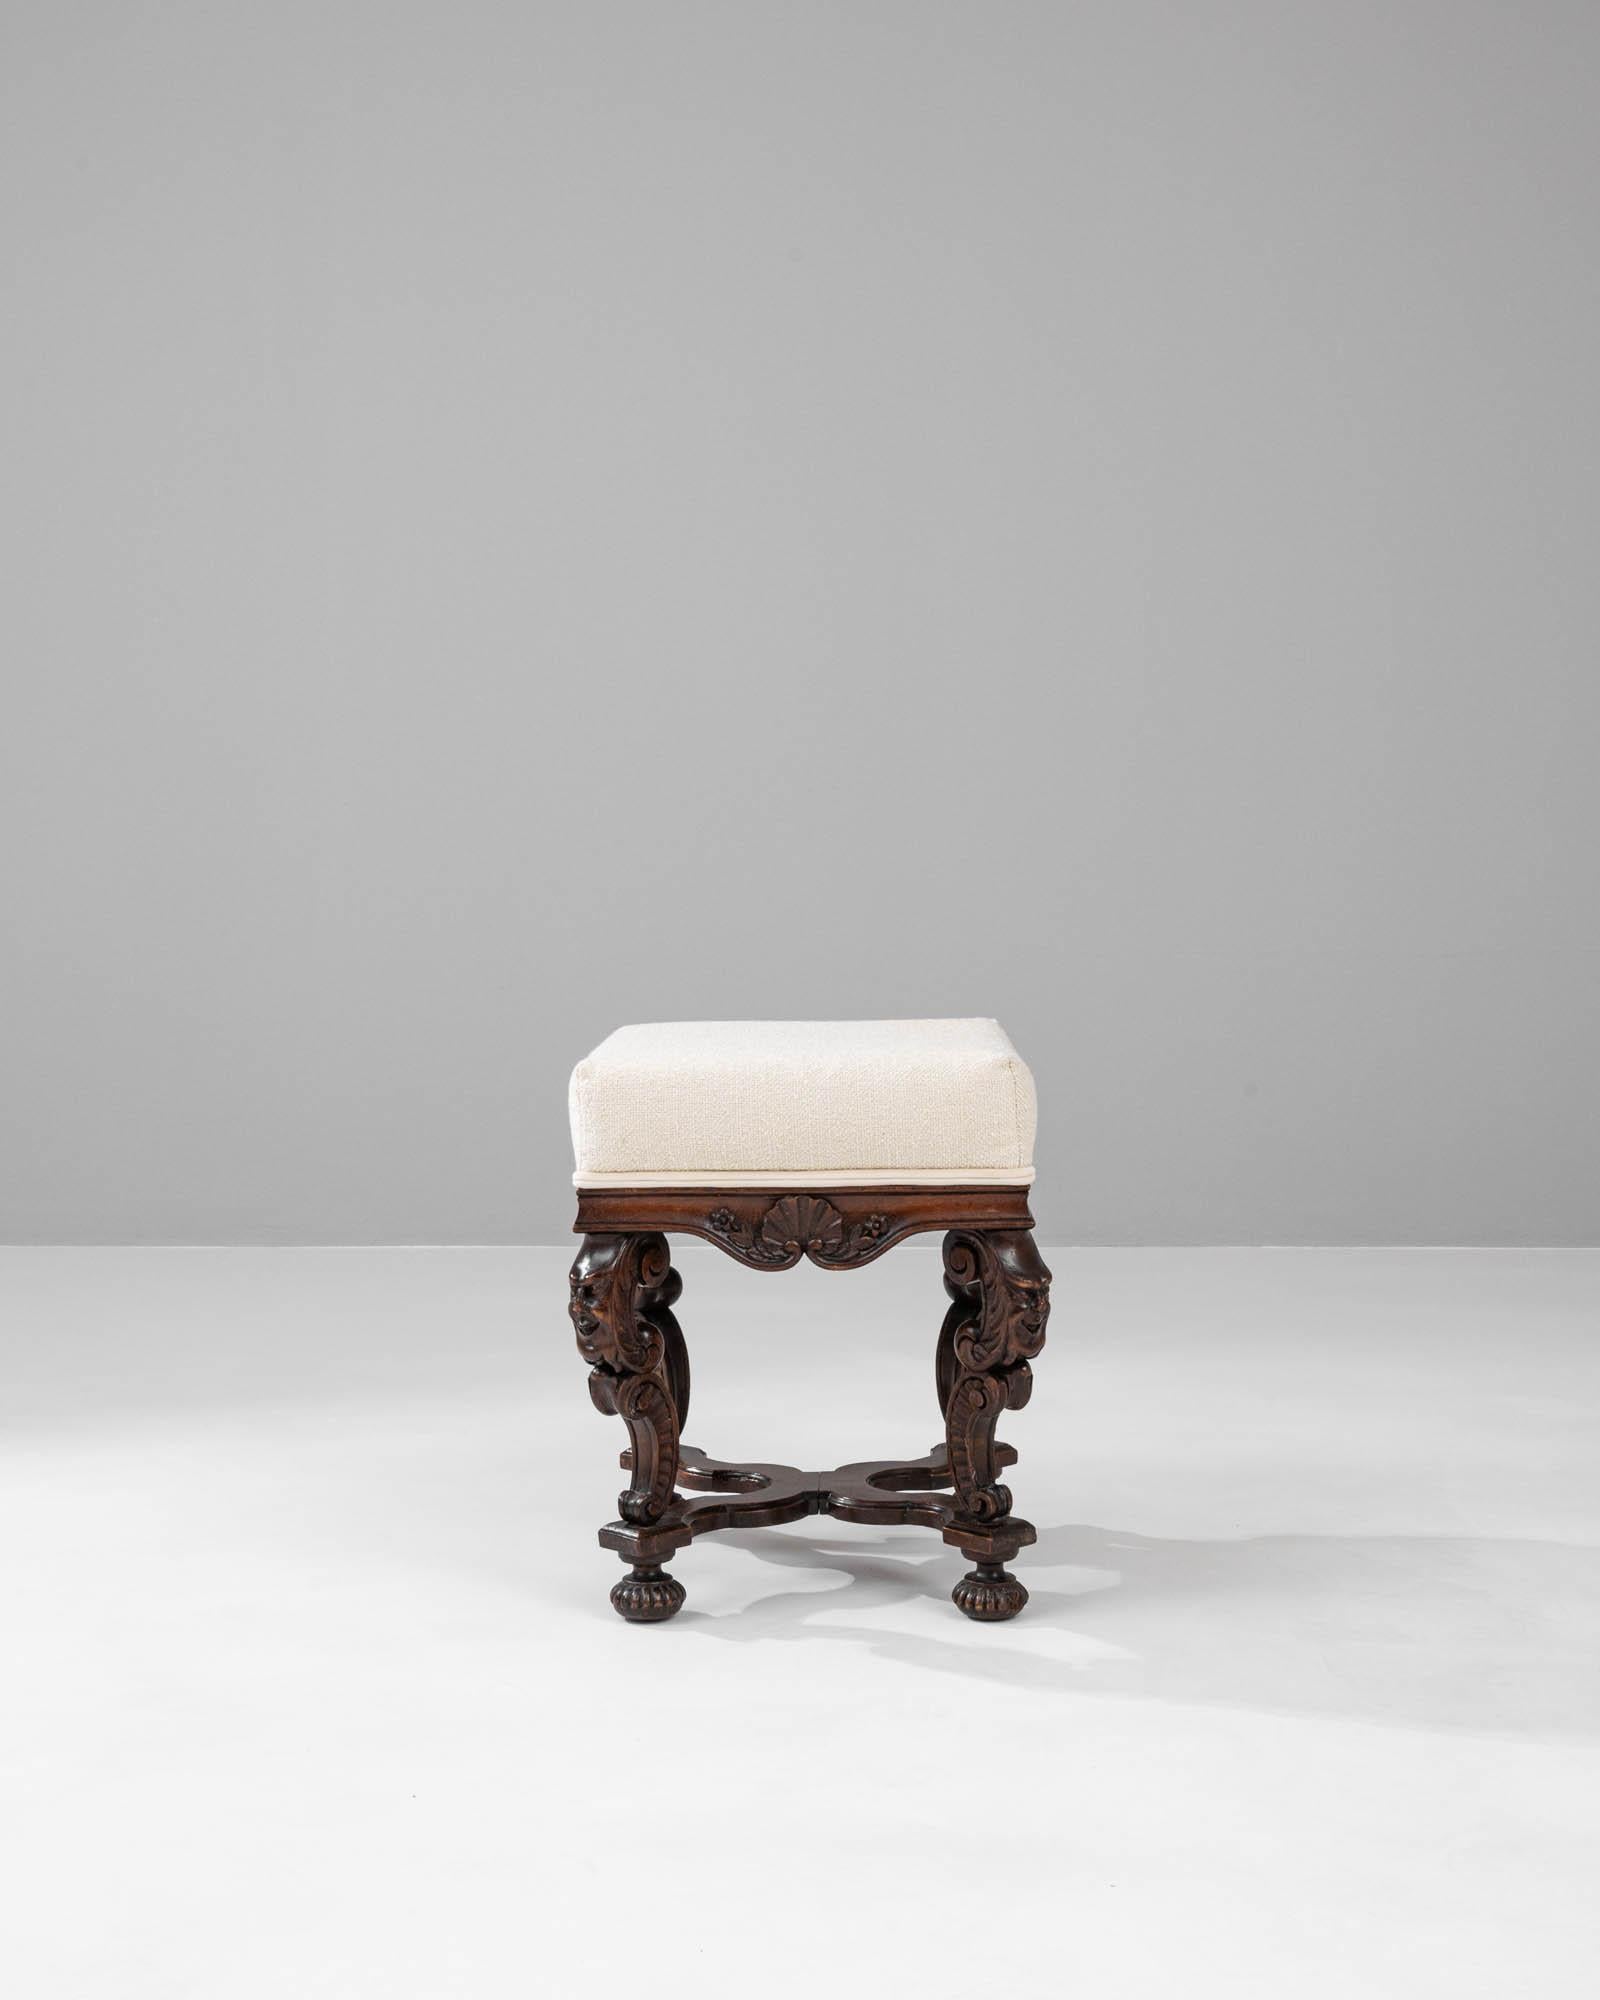 This 19th Century French upholstered stool is a delightful nod to the ornate and meticulous craftsmanship of the period. The dark, richly stained wood boasts expertly carved details, from the elegant scrollwork to the delicate floral accents, each